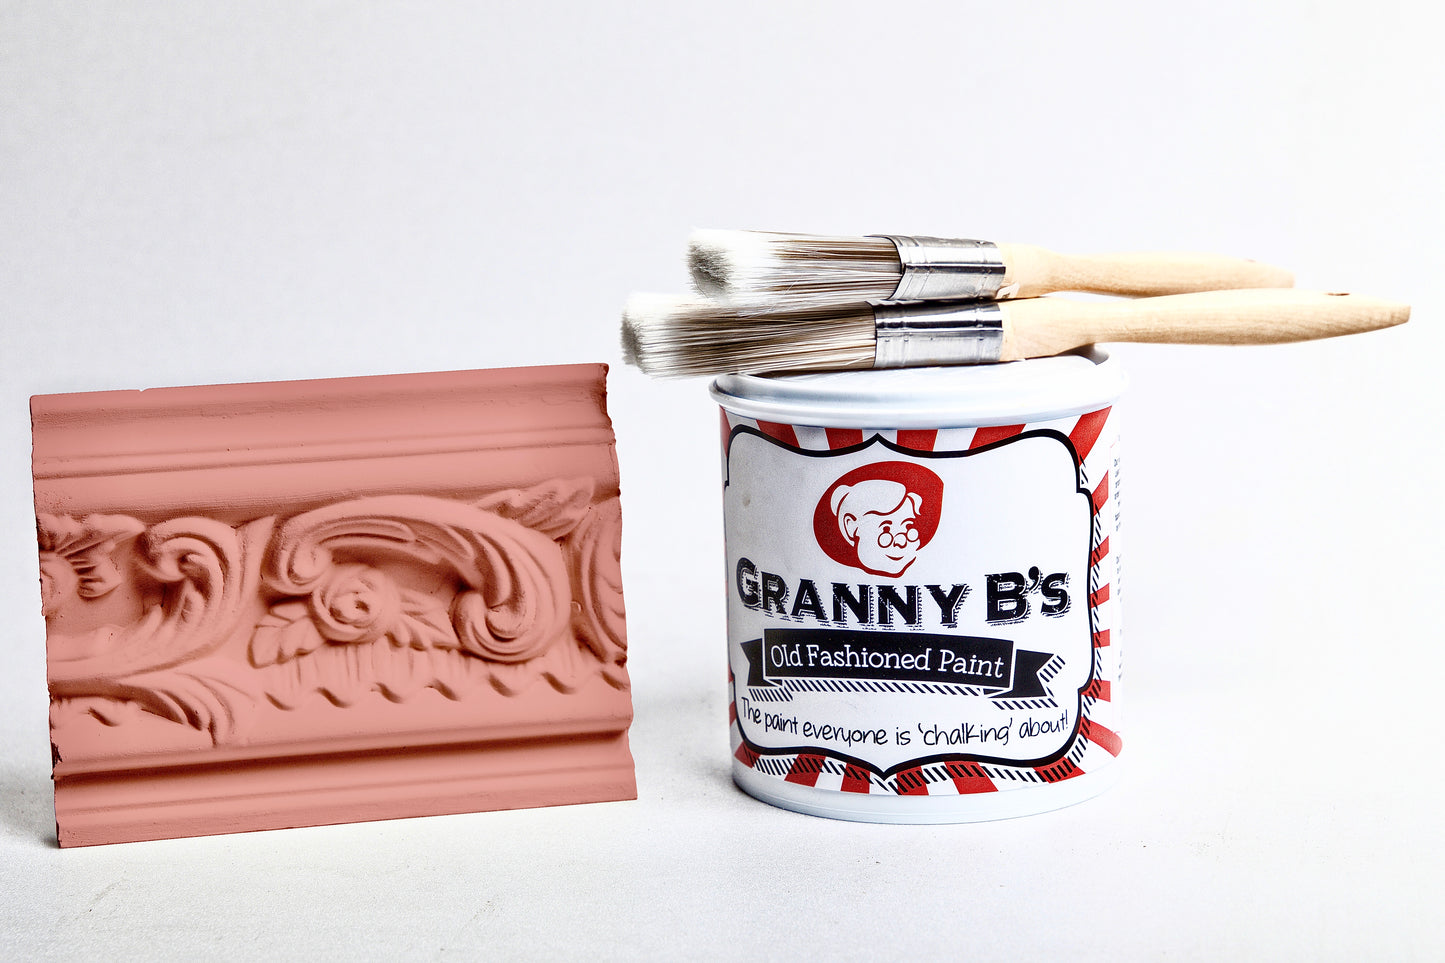 Old Fashioned Paint - Pretty Flamingo (Coral Pink) - Granny B's Old Fashioned Paint